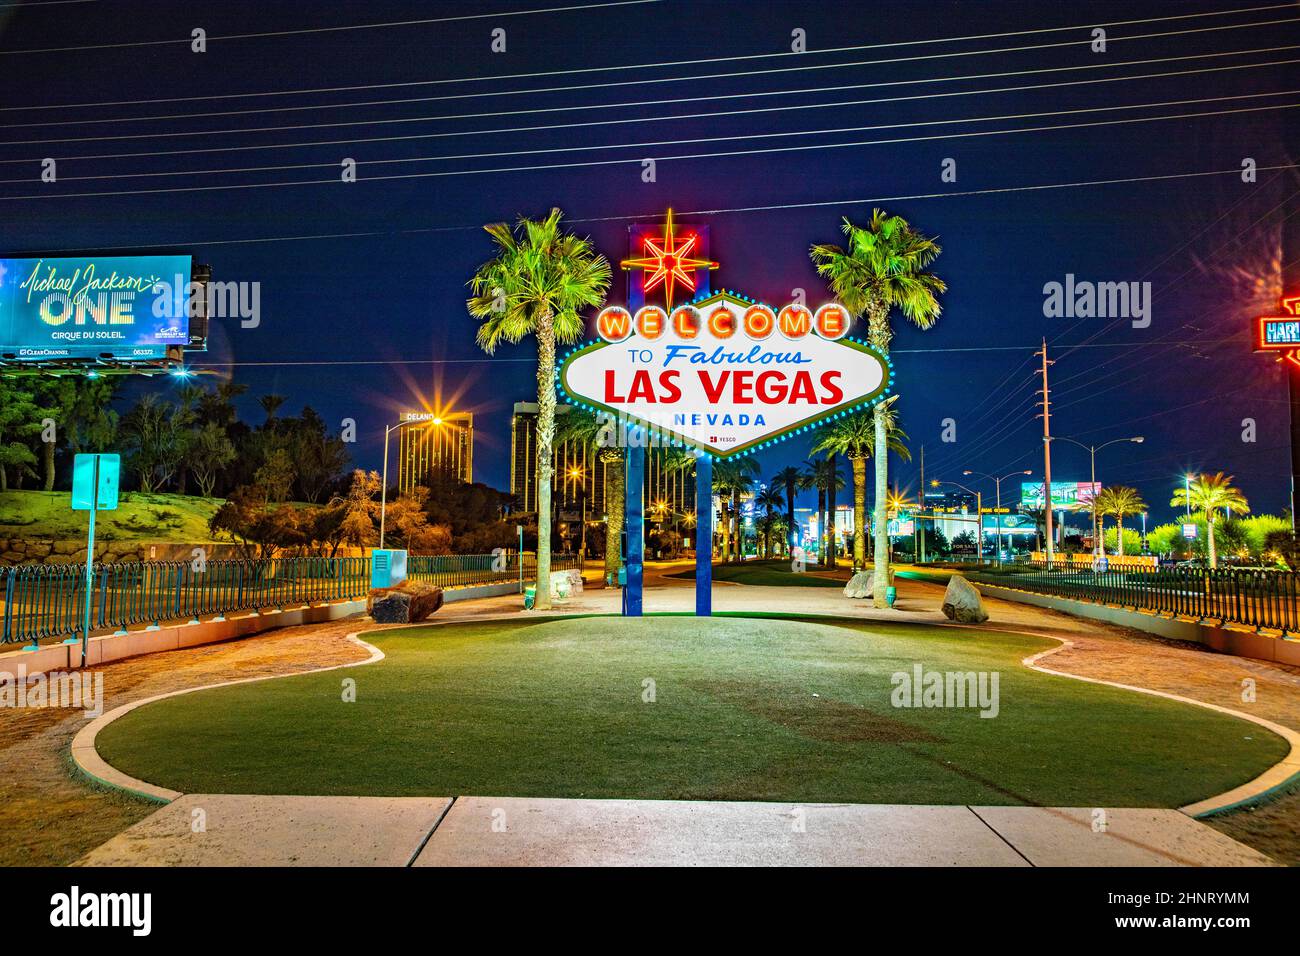 amous Las Vegas sign at city entrance, detail by night Stock Photo